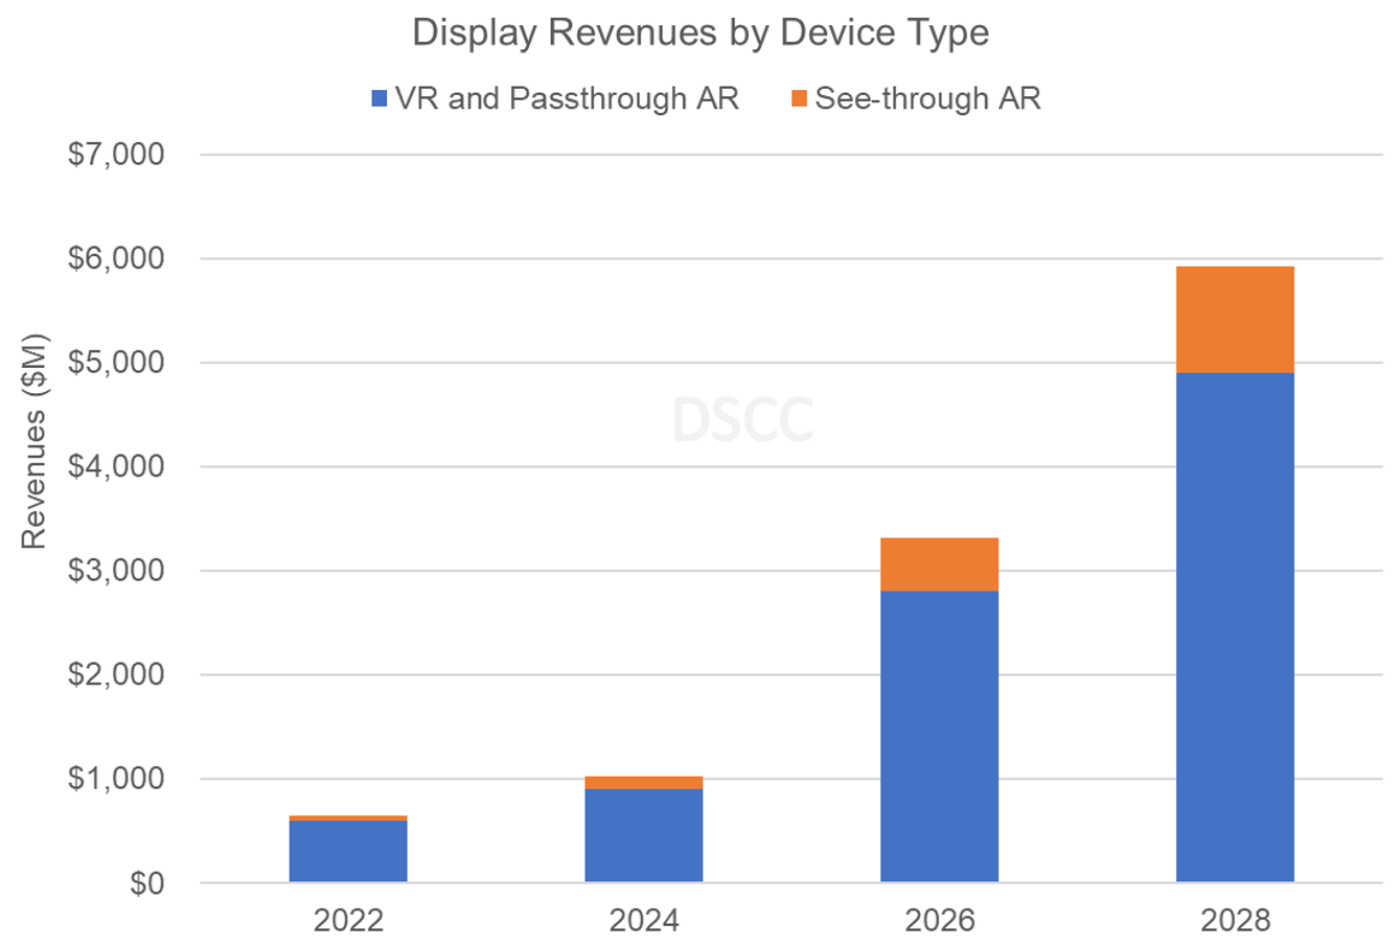 Source: DSCC’s Augmented and Virtual Reality Display Technologies and Market Report